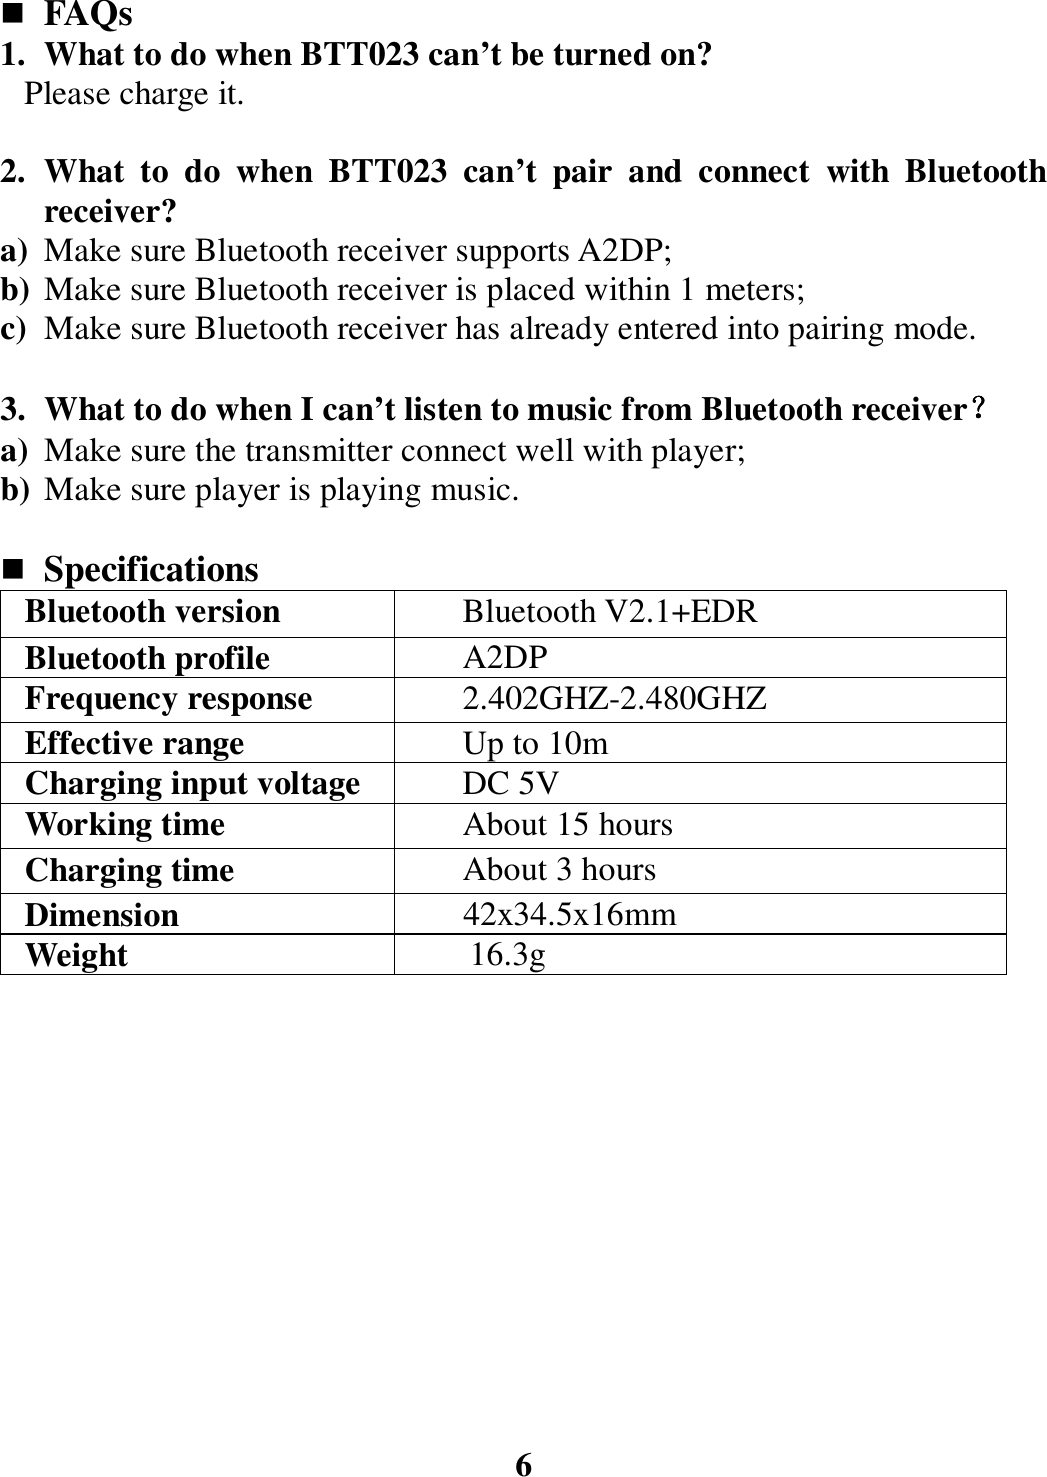  FAQs 1. What to do when BTT023 can’t be turned on? Please charge it.  2. What  to  do  when  BTT023  can’t  pair  and  connect  with  Bluetooth receiver?   a) Make sure Bluetooth receiver supports A2DP; b) Make sure Bluetooth receiver is placed within 1 meters; c) Make sure Bluetooth receiver has already entered into pairing mode.  3. What to do when I can’t listen to music from Bluetooth receiver？？？？ a) Make sure the transmitter connect well with player; b) Make sure player is playing music.   Specifications Bluetooth version  Bluetooth V2.1+EDR Bluetooth profile  A2DP Frequency response  2.402GHZ-2.480GHZ Effective range  Up to 10m Charging input voltage DC 5V Working time  About 15 hours Charging time  About 3 hours Dimension          42x34.5x16mm Weight    16.3g             6 